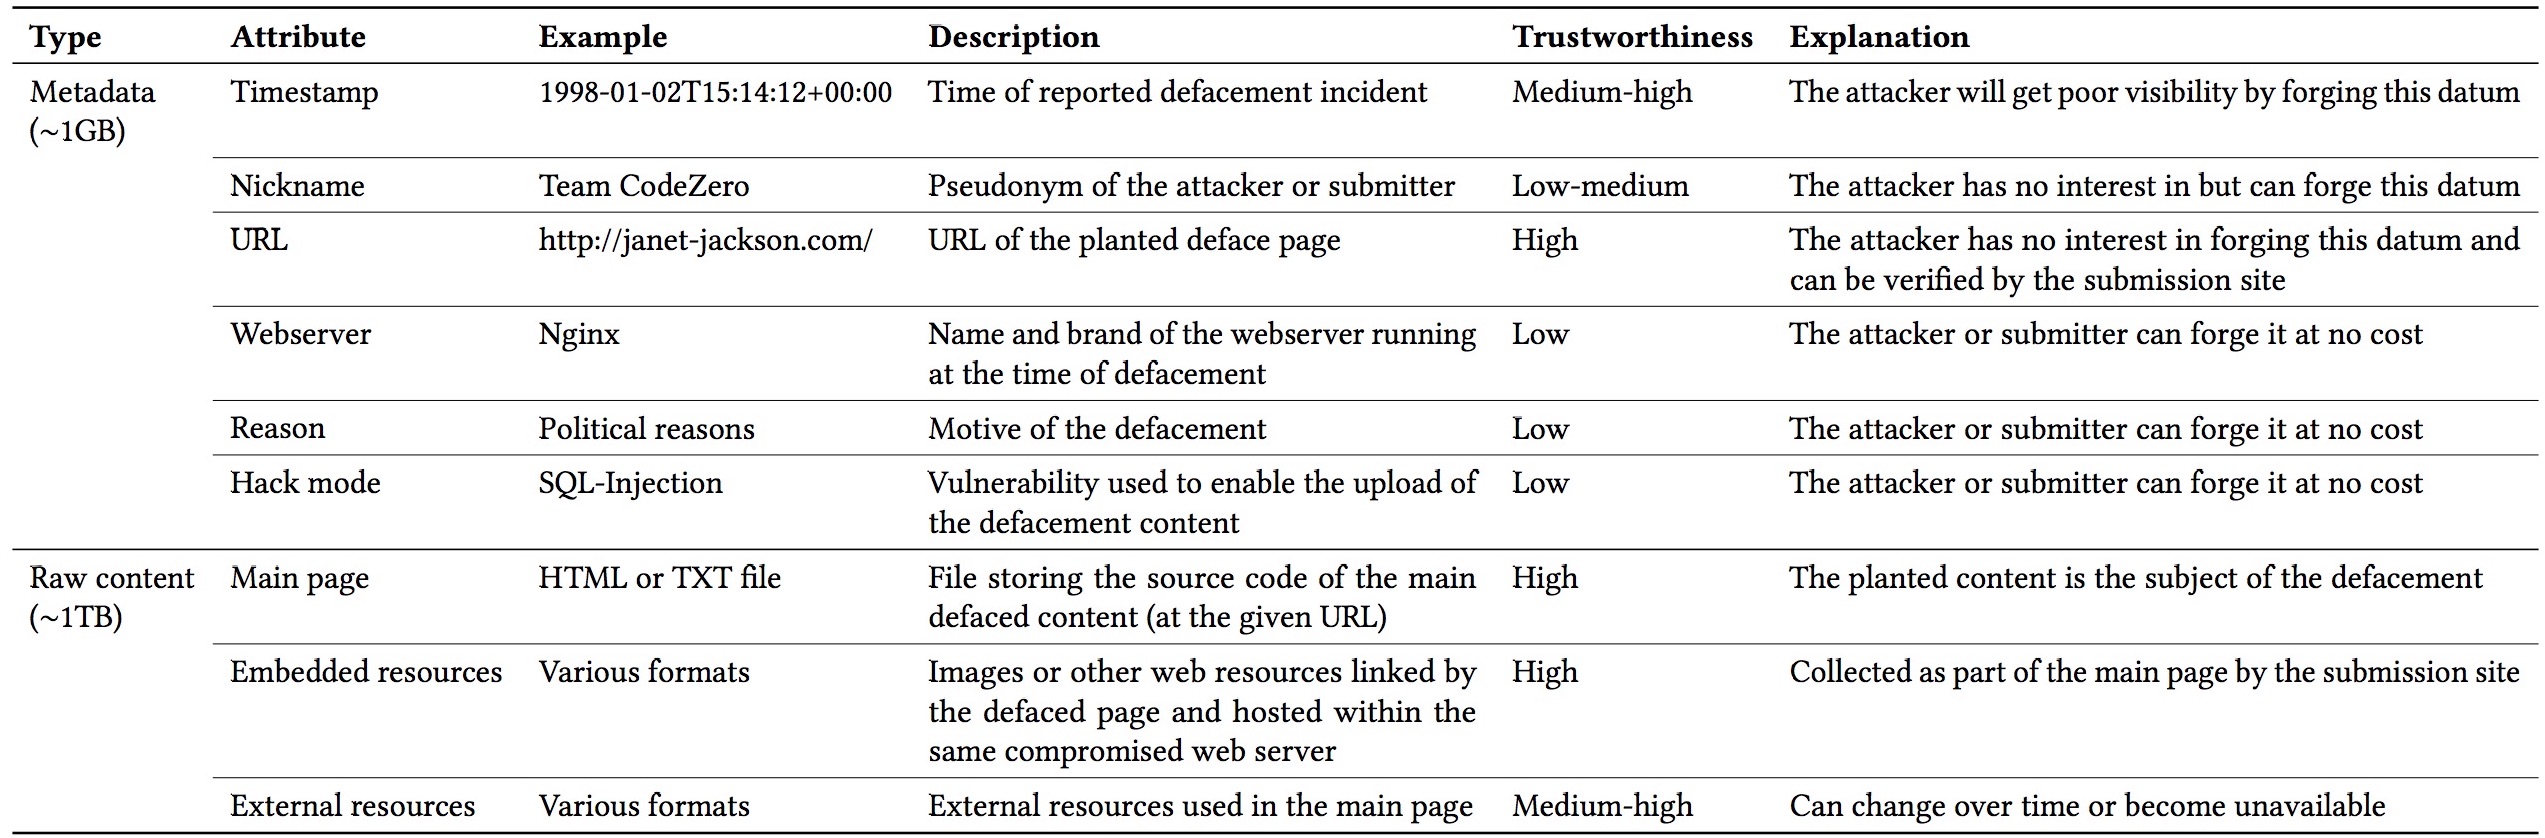 Metadata and raw content available in our dataset, along with a description of the trustworthiness of each attribute.